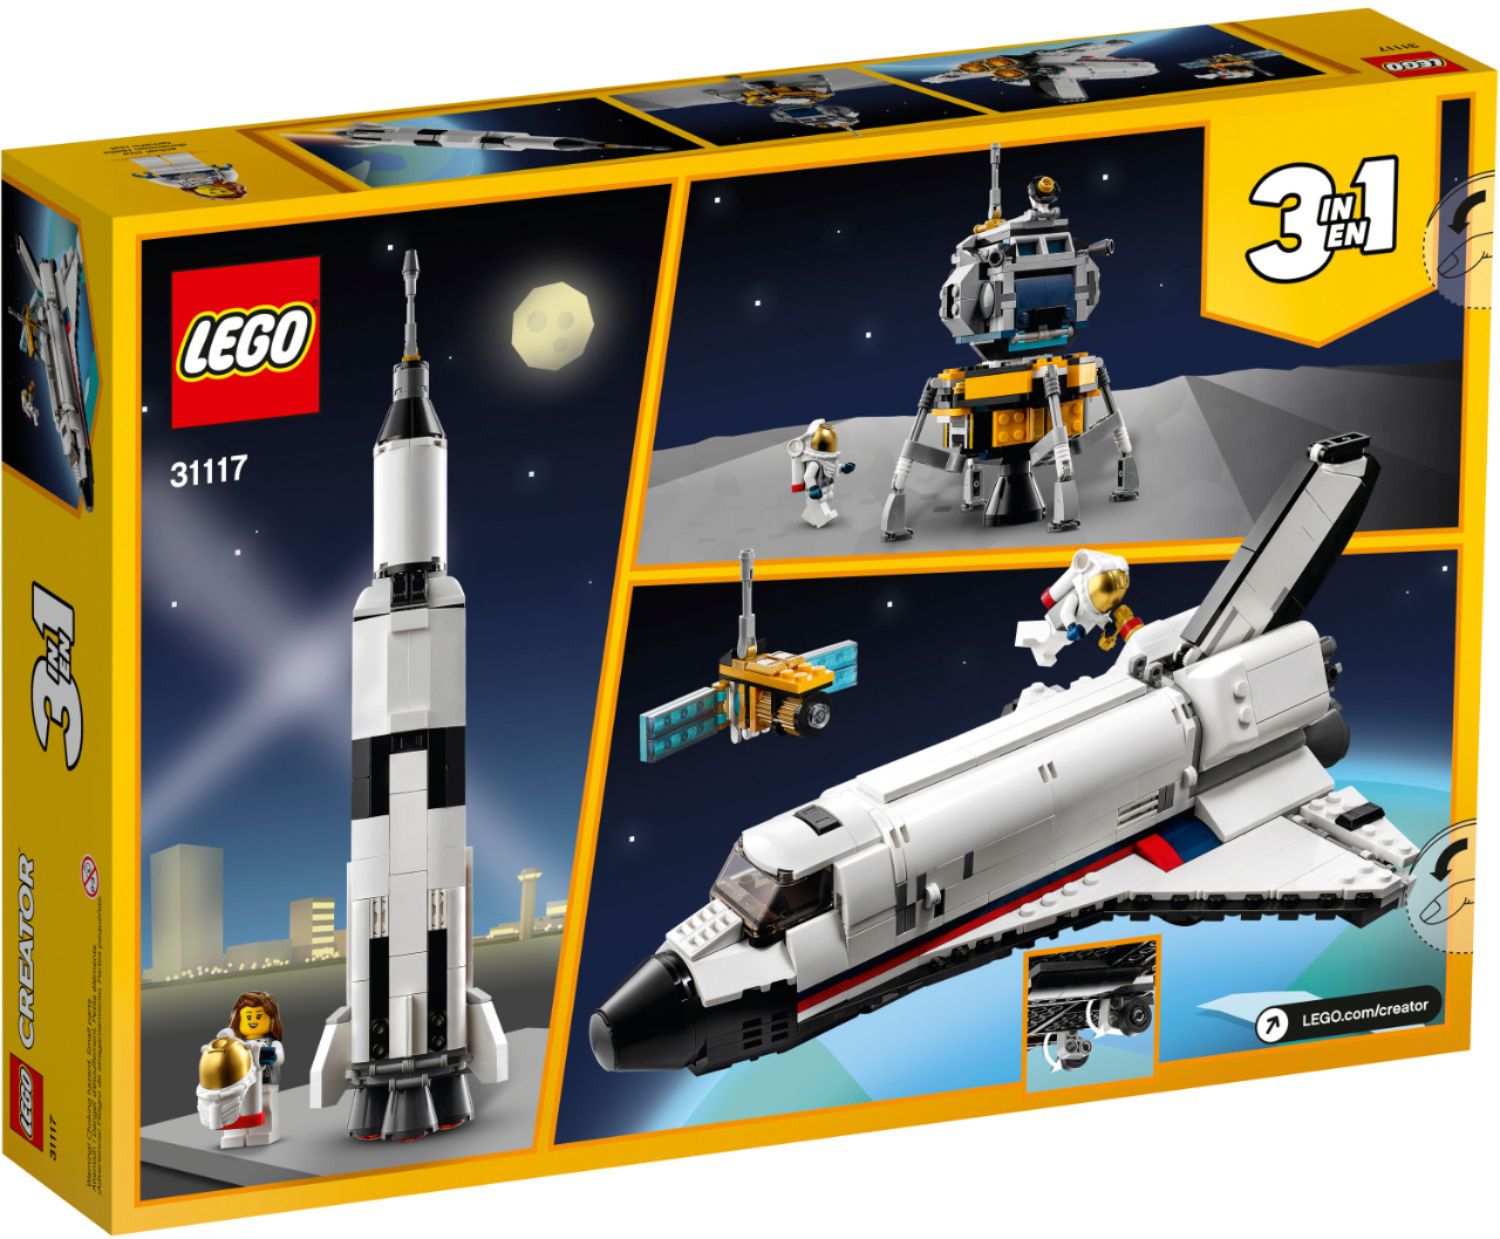 LEGO Mini Space Shuttle Toy Soars Out of Stores in Giveaway